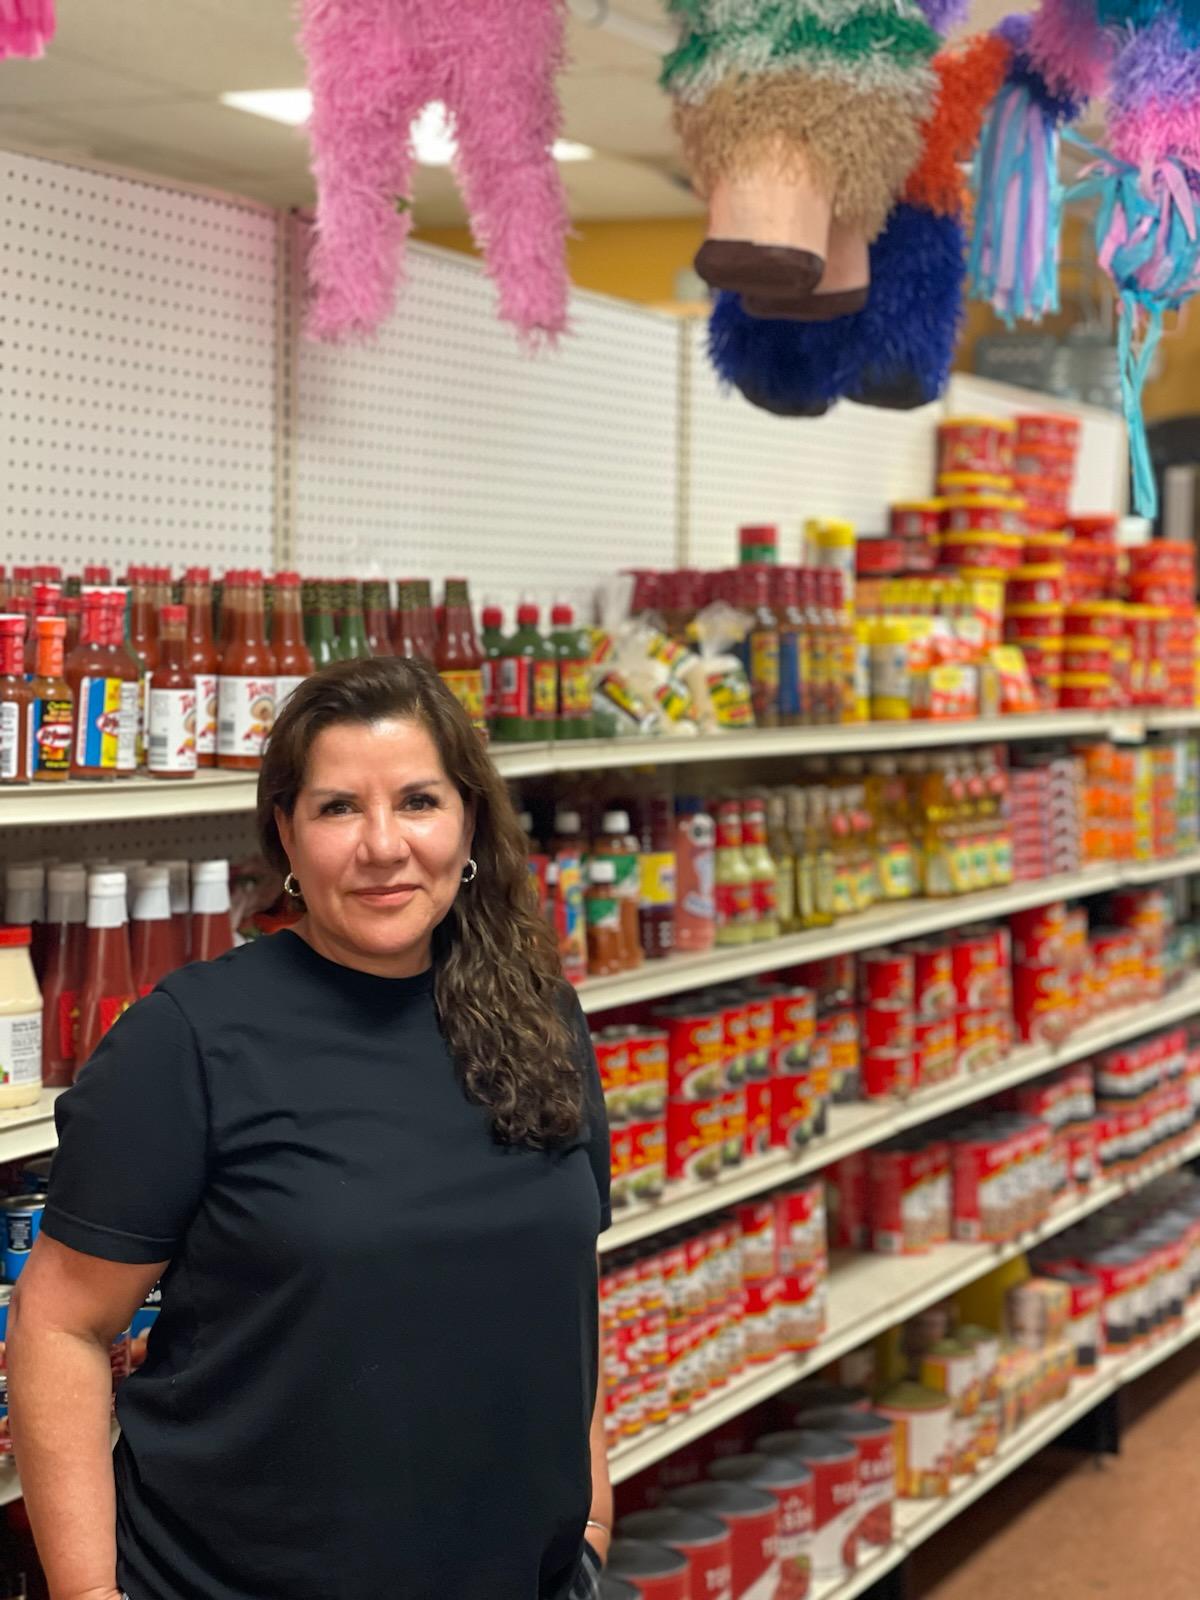 Maria Parga standing in a store with shelves of food behind her and pinatas hanging above her head.